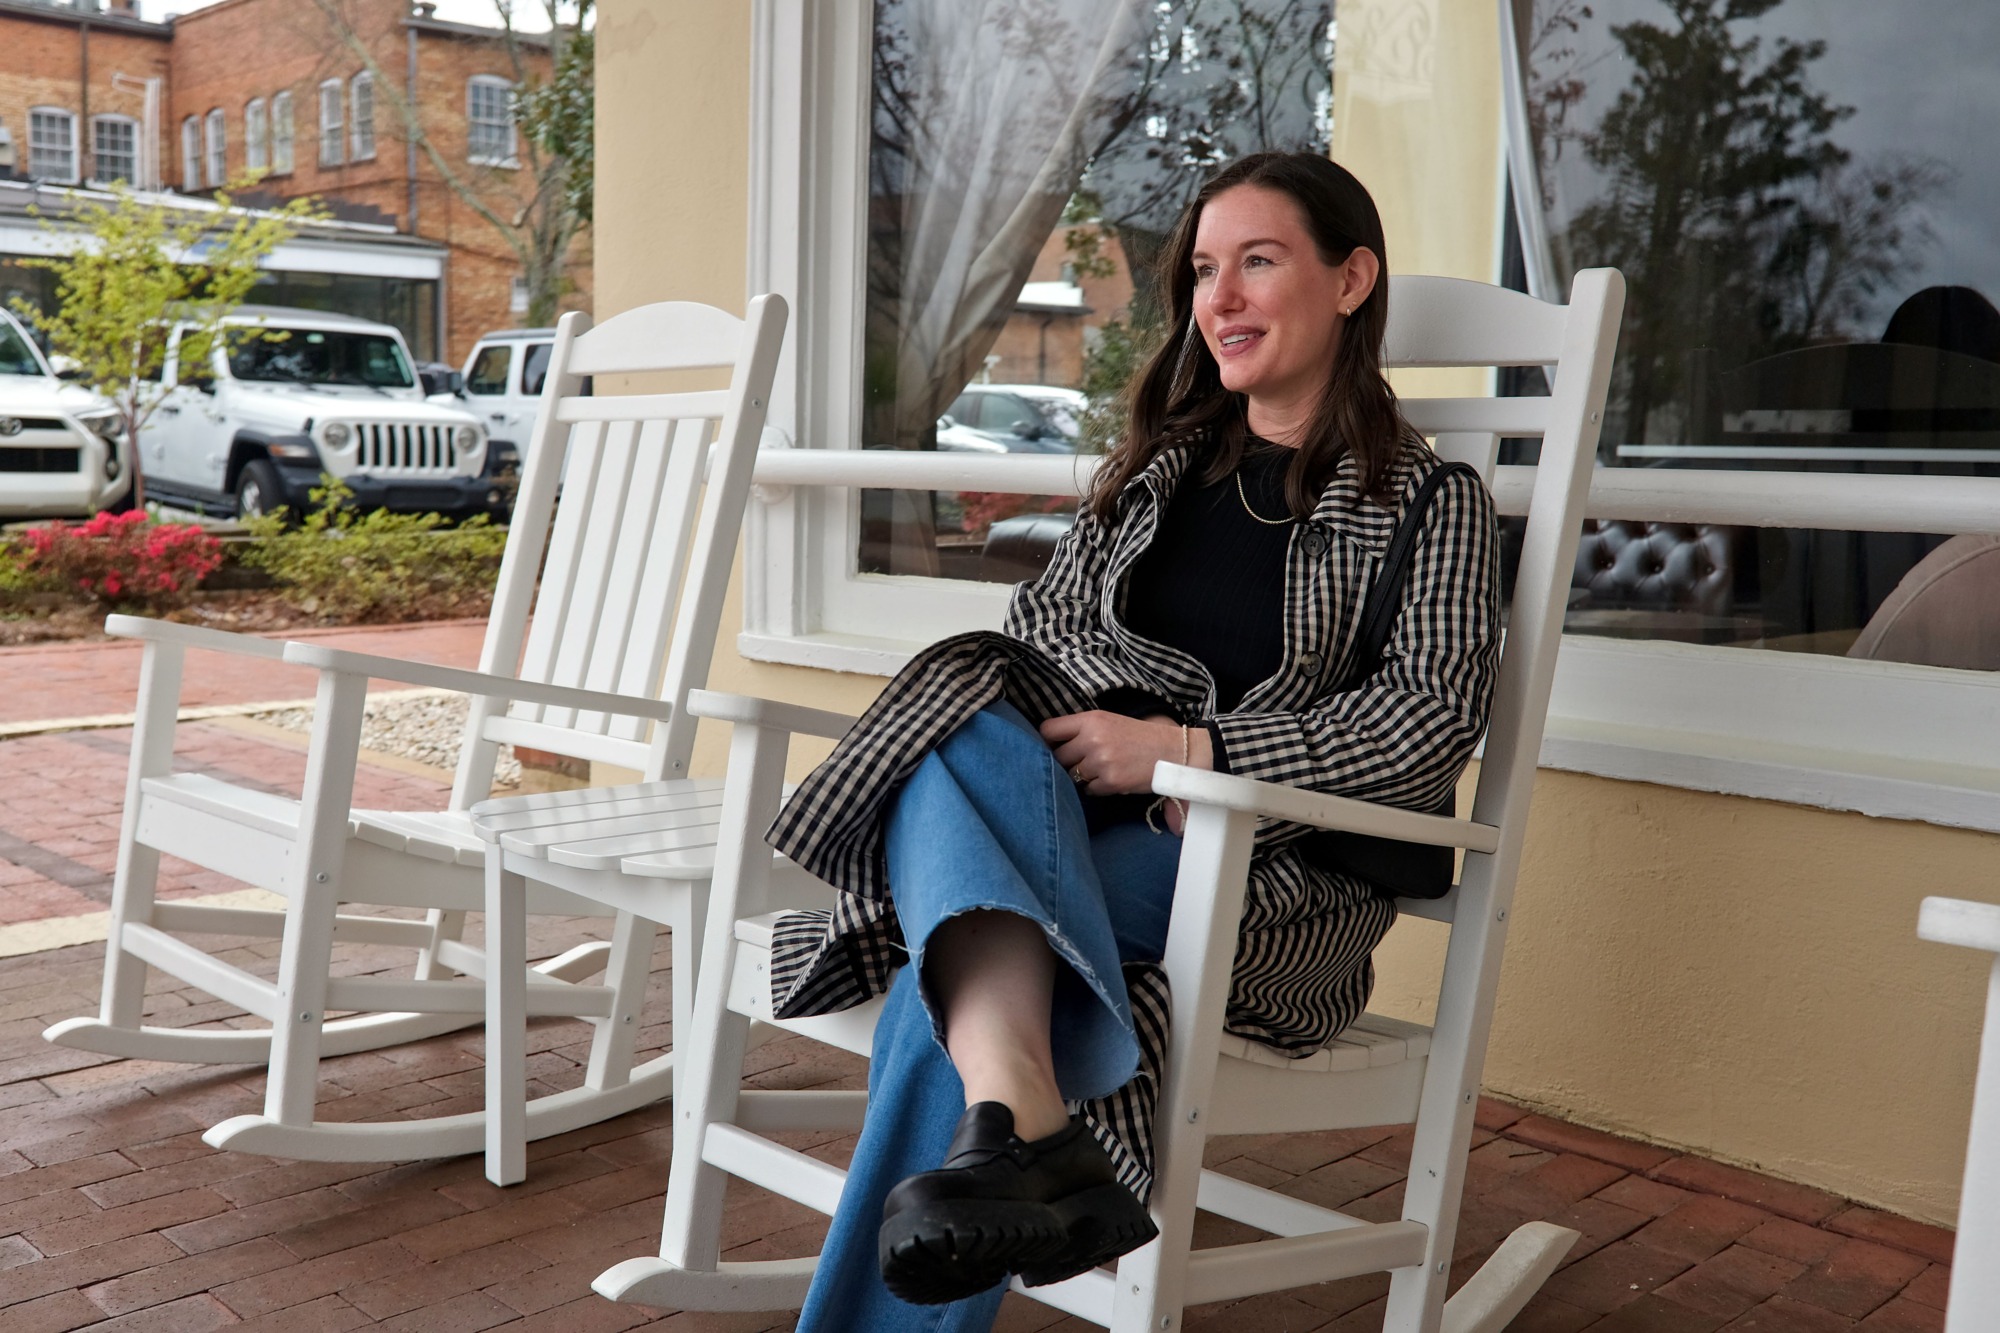 Alyssa wears a black top, blue jeans, and gingham trench and sits in a rocking chair